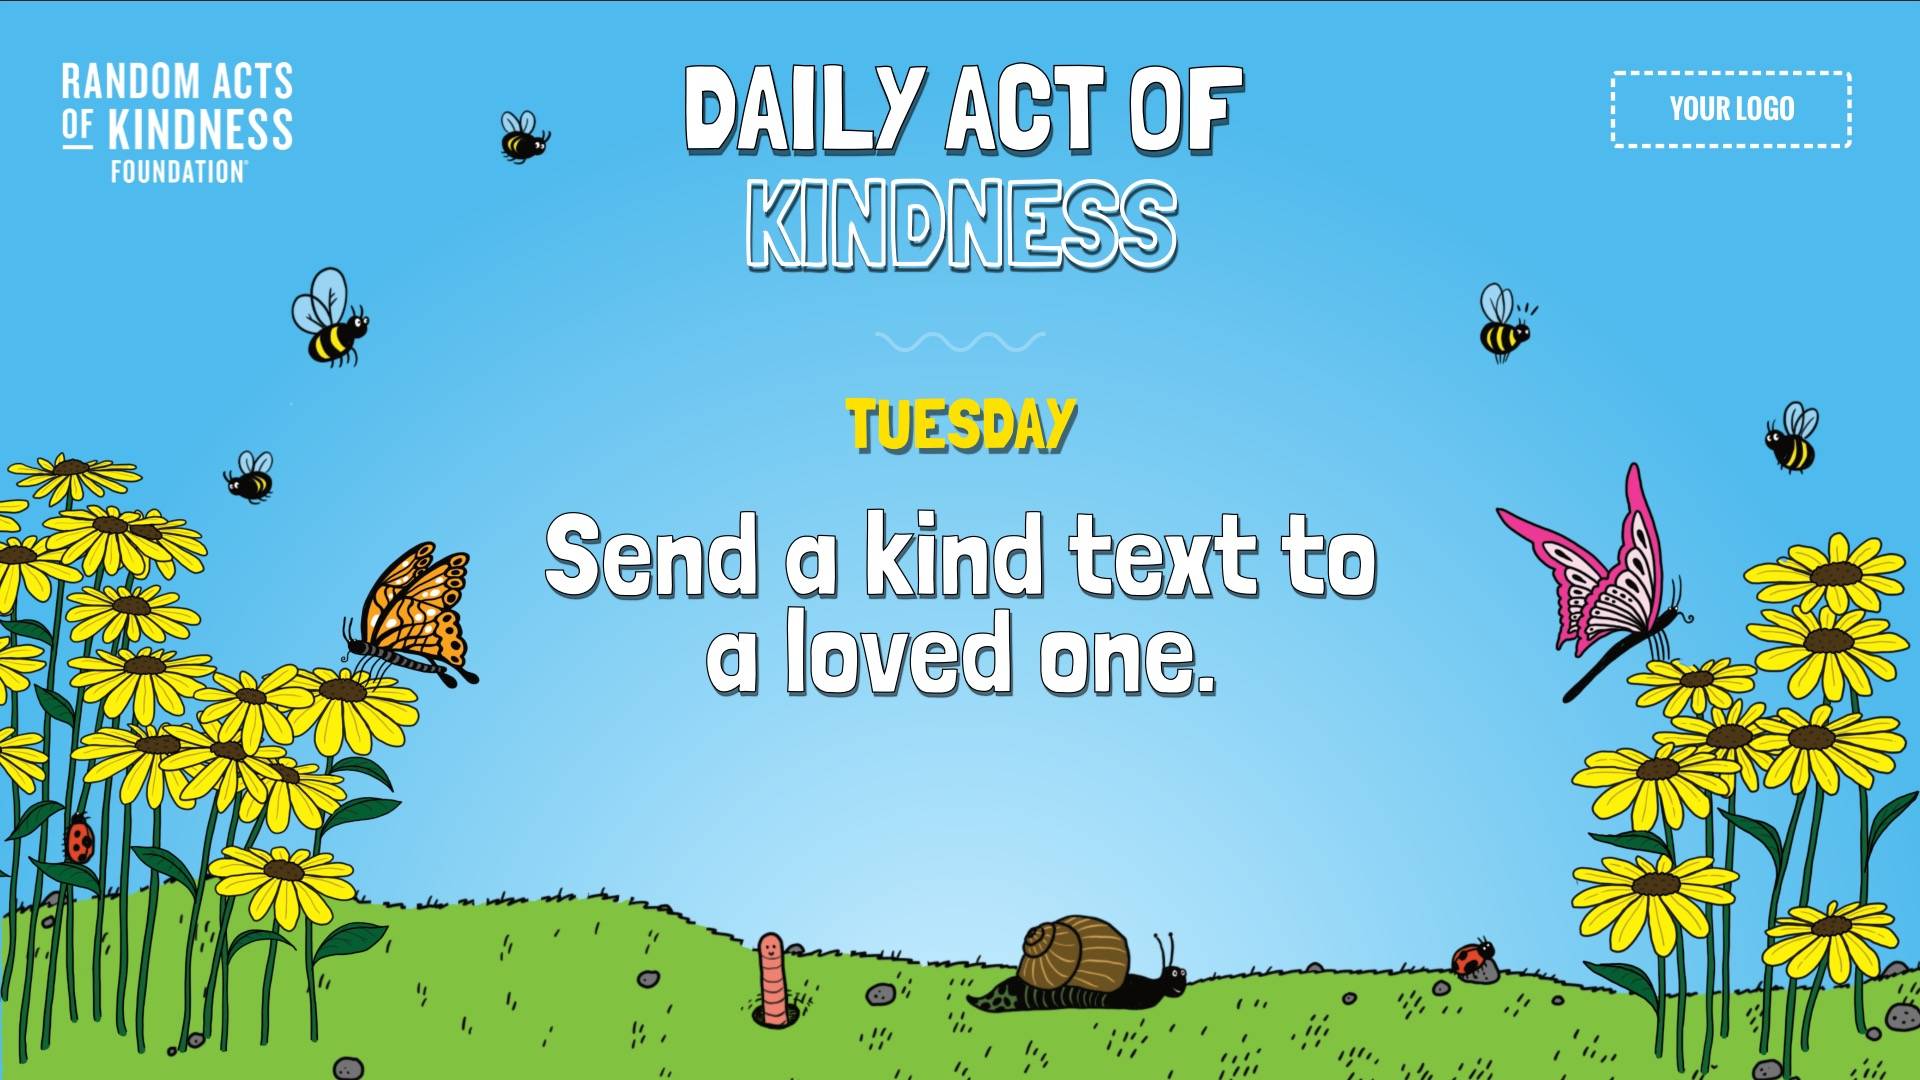 Daily Acts of Kindness Digital Signage Template